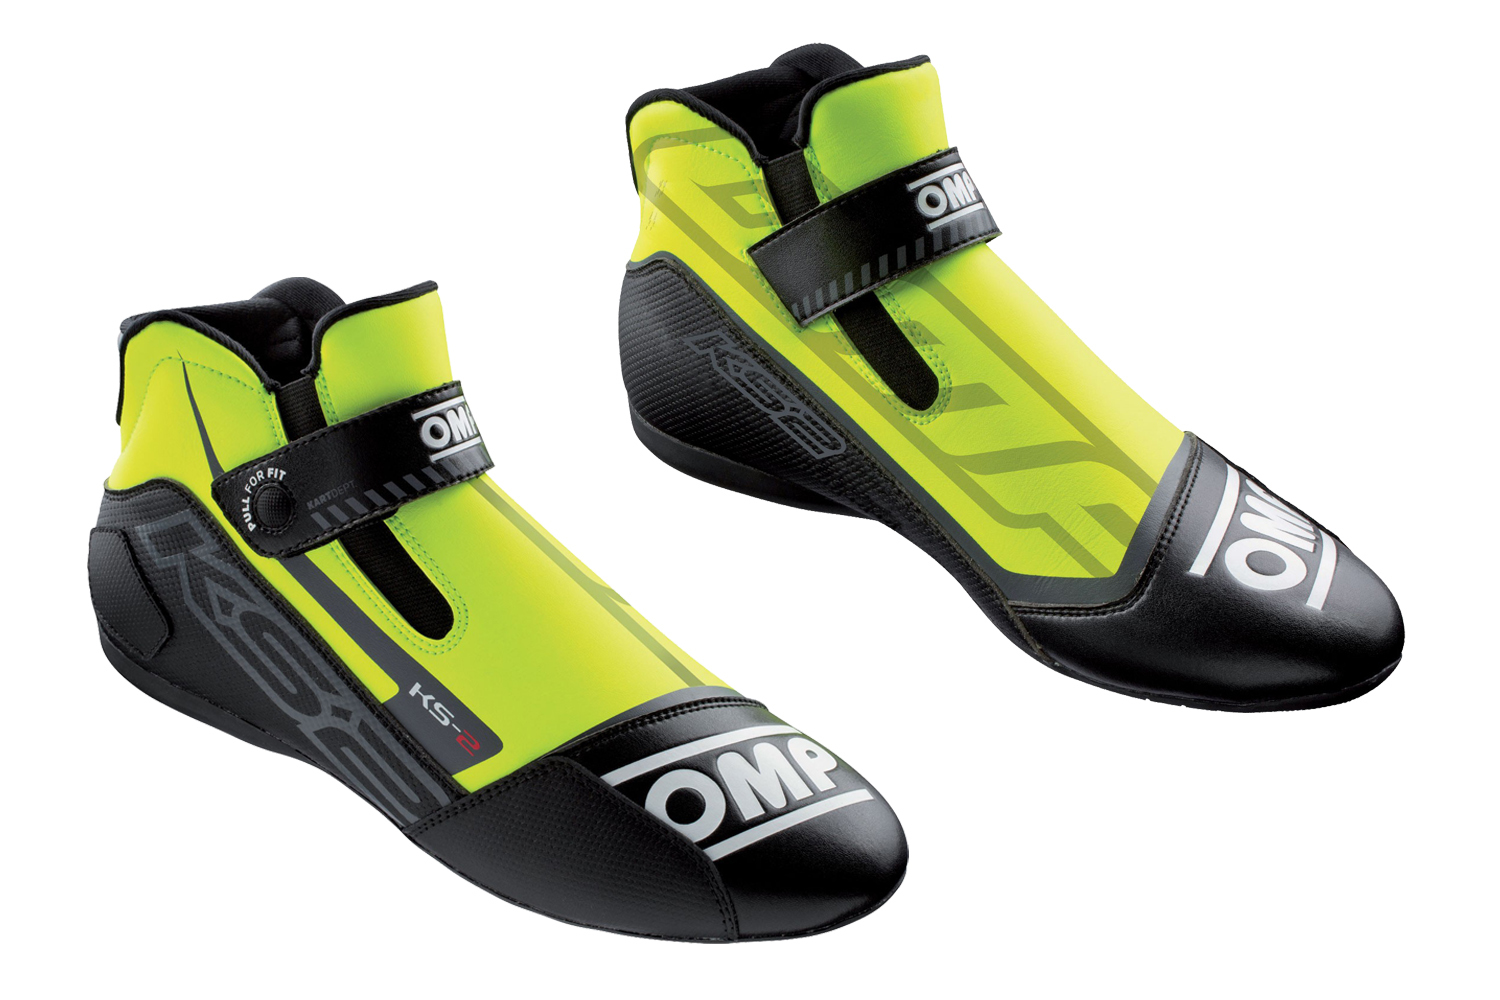 OMP Racing IC82505946 Driving Shoe, KS-2, Mid-Top, FIA Approved, Suede Leather Outer, Fire Retardant Fabric Inner, Fluorescent Yellow / Black, Euro Size 46, Pair